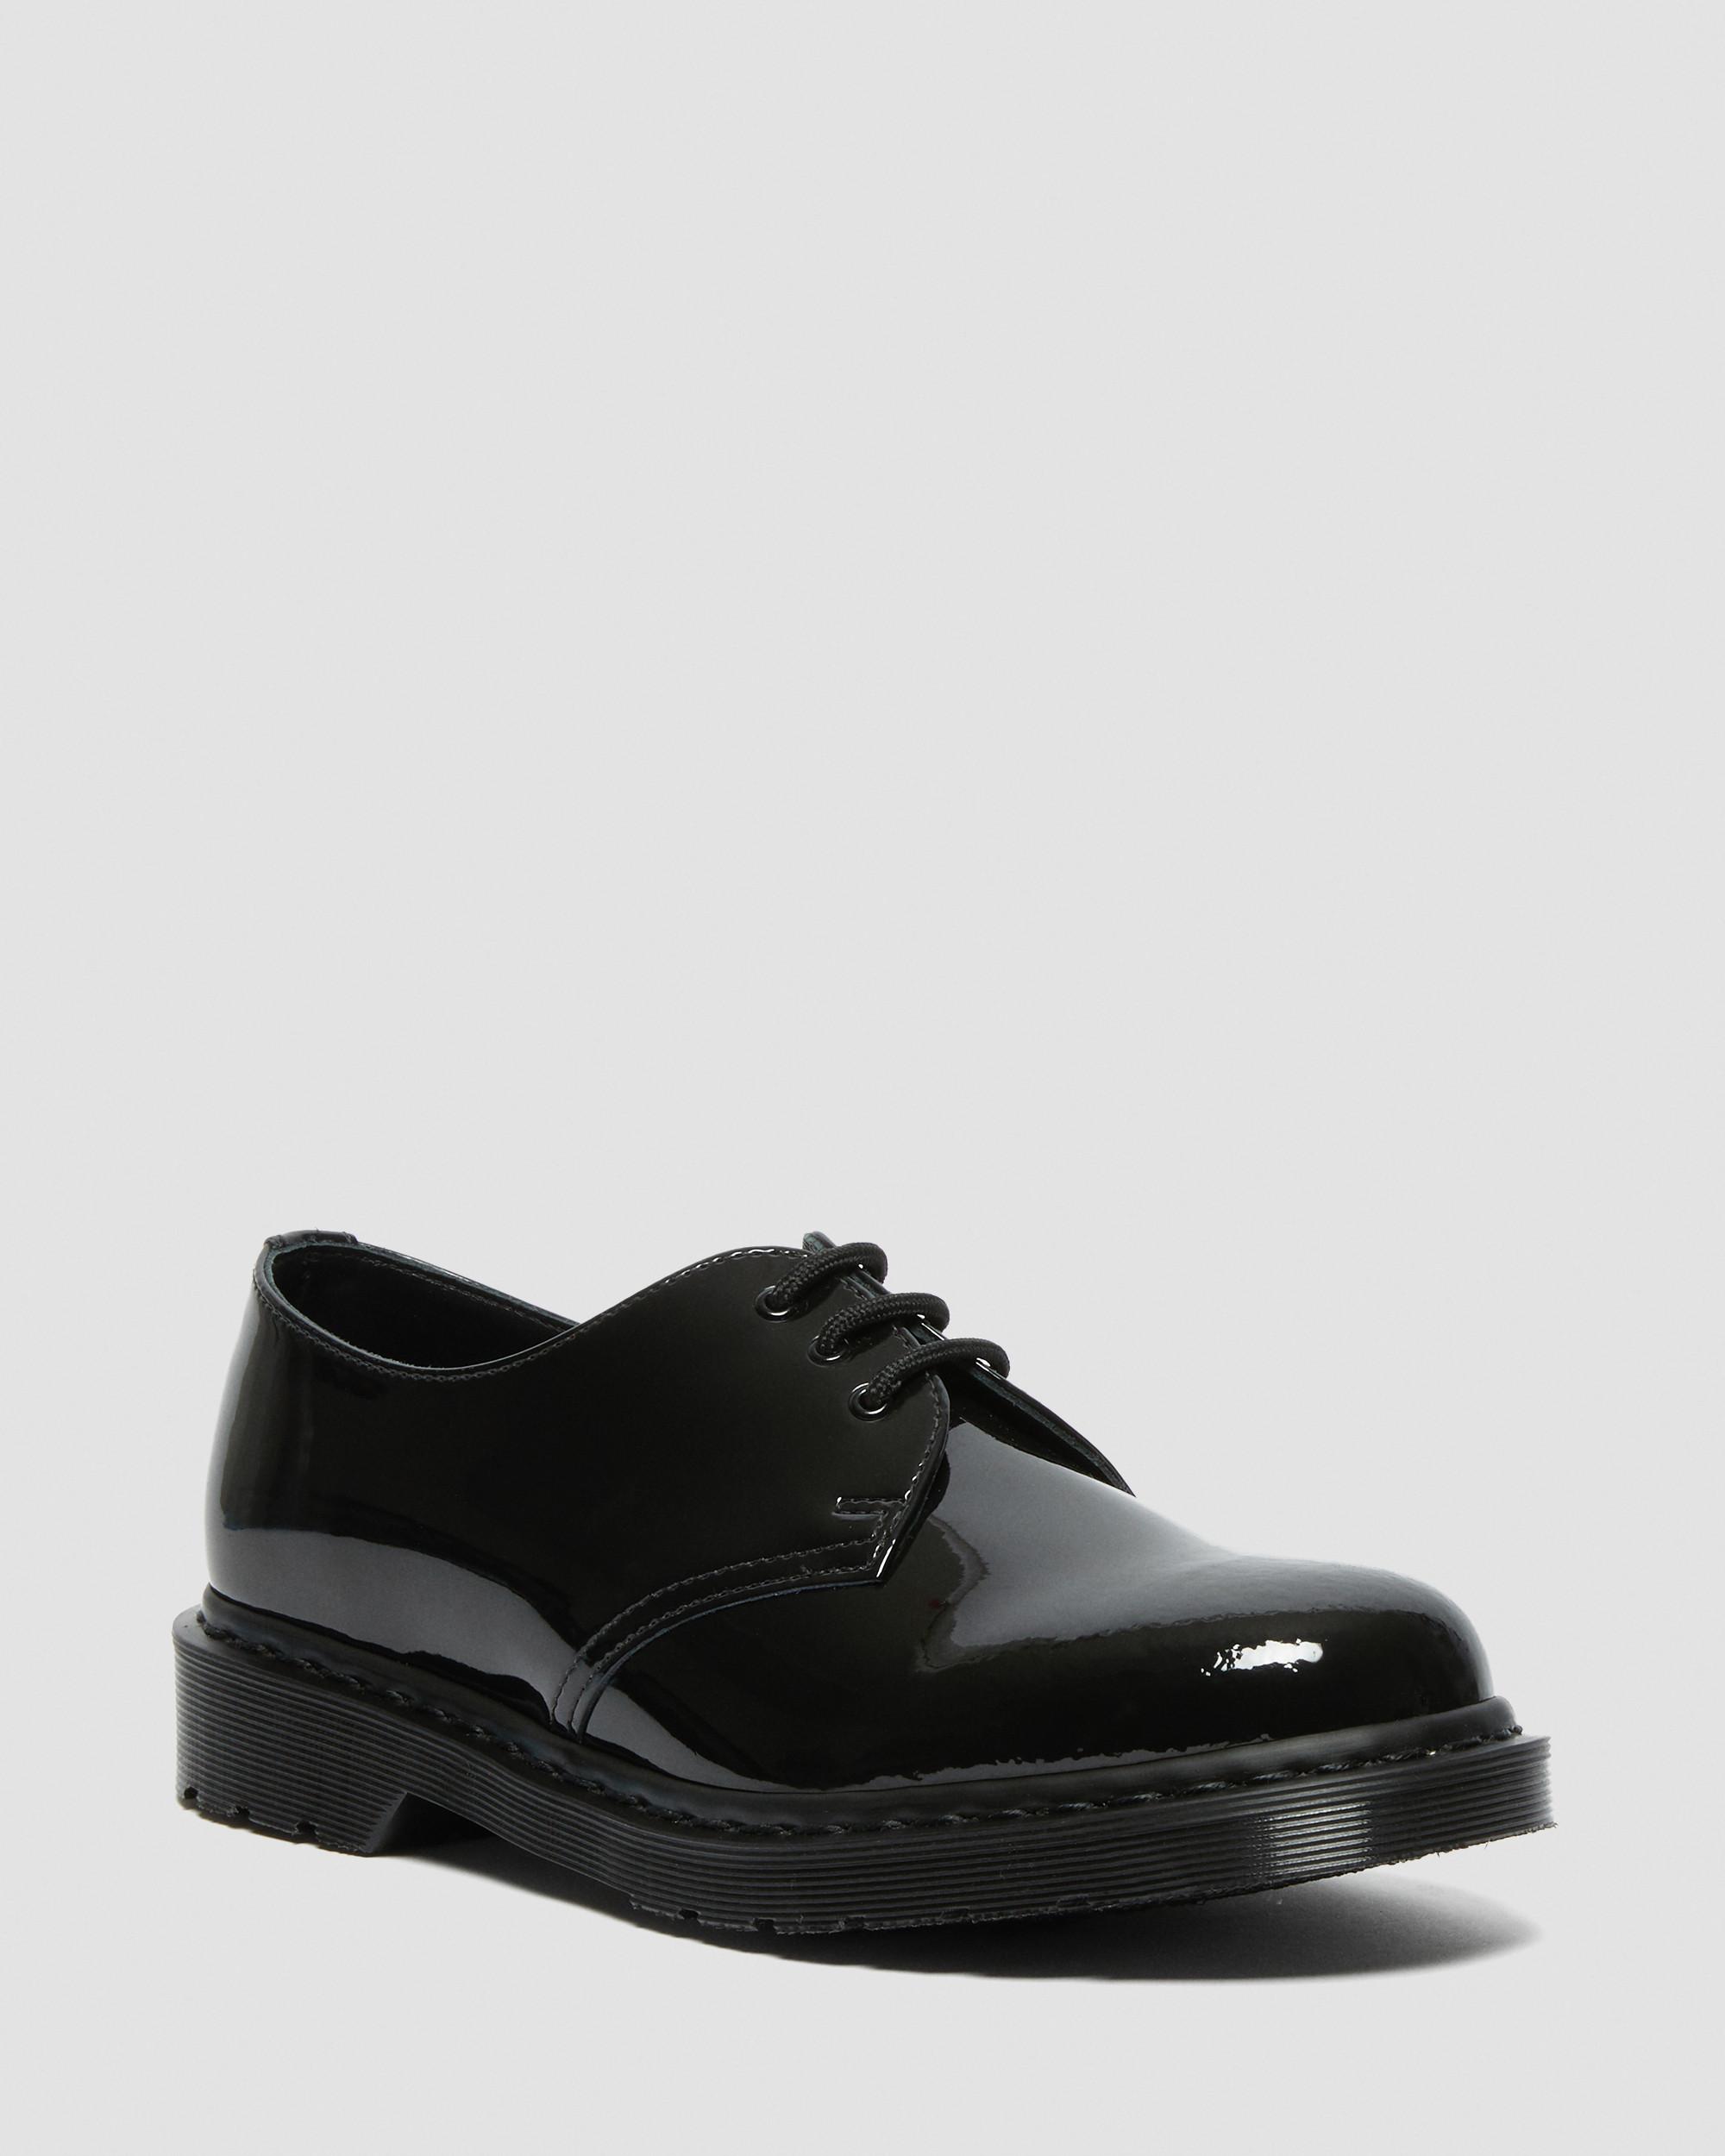 DR MARTENS 1461 Made in England Mono Patent Leather Oxford Shoes